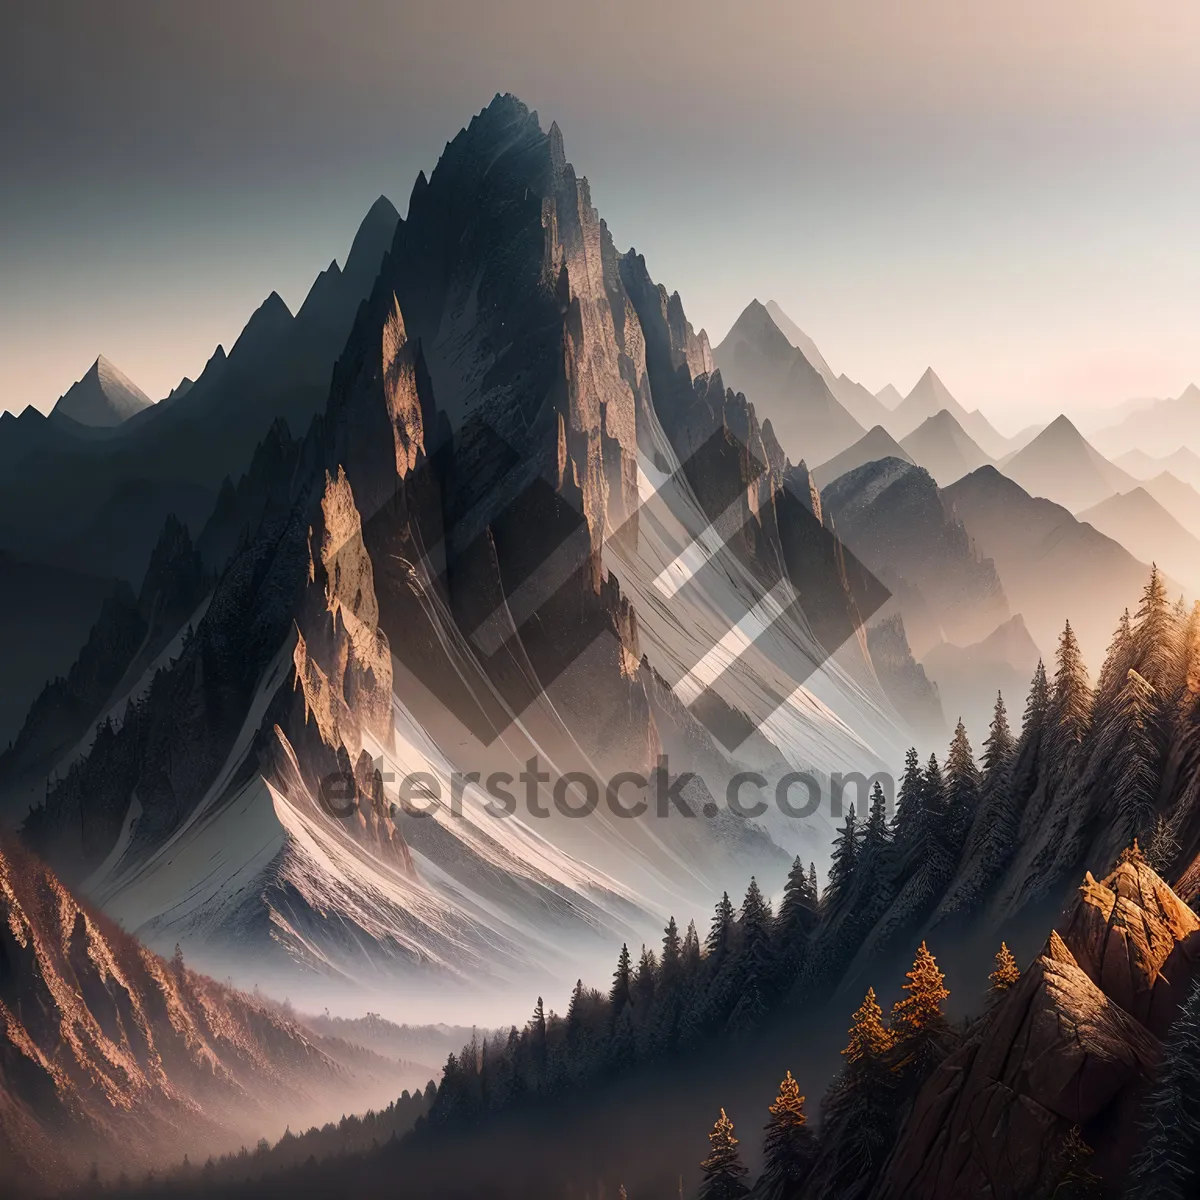 Picture of Snow-capped Peaks in Majestic Alpine Landscape